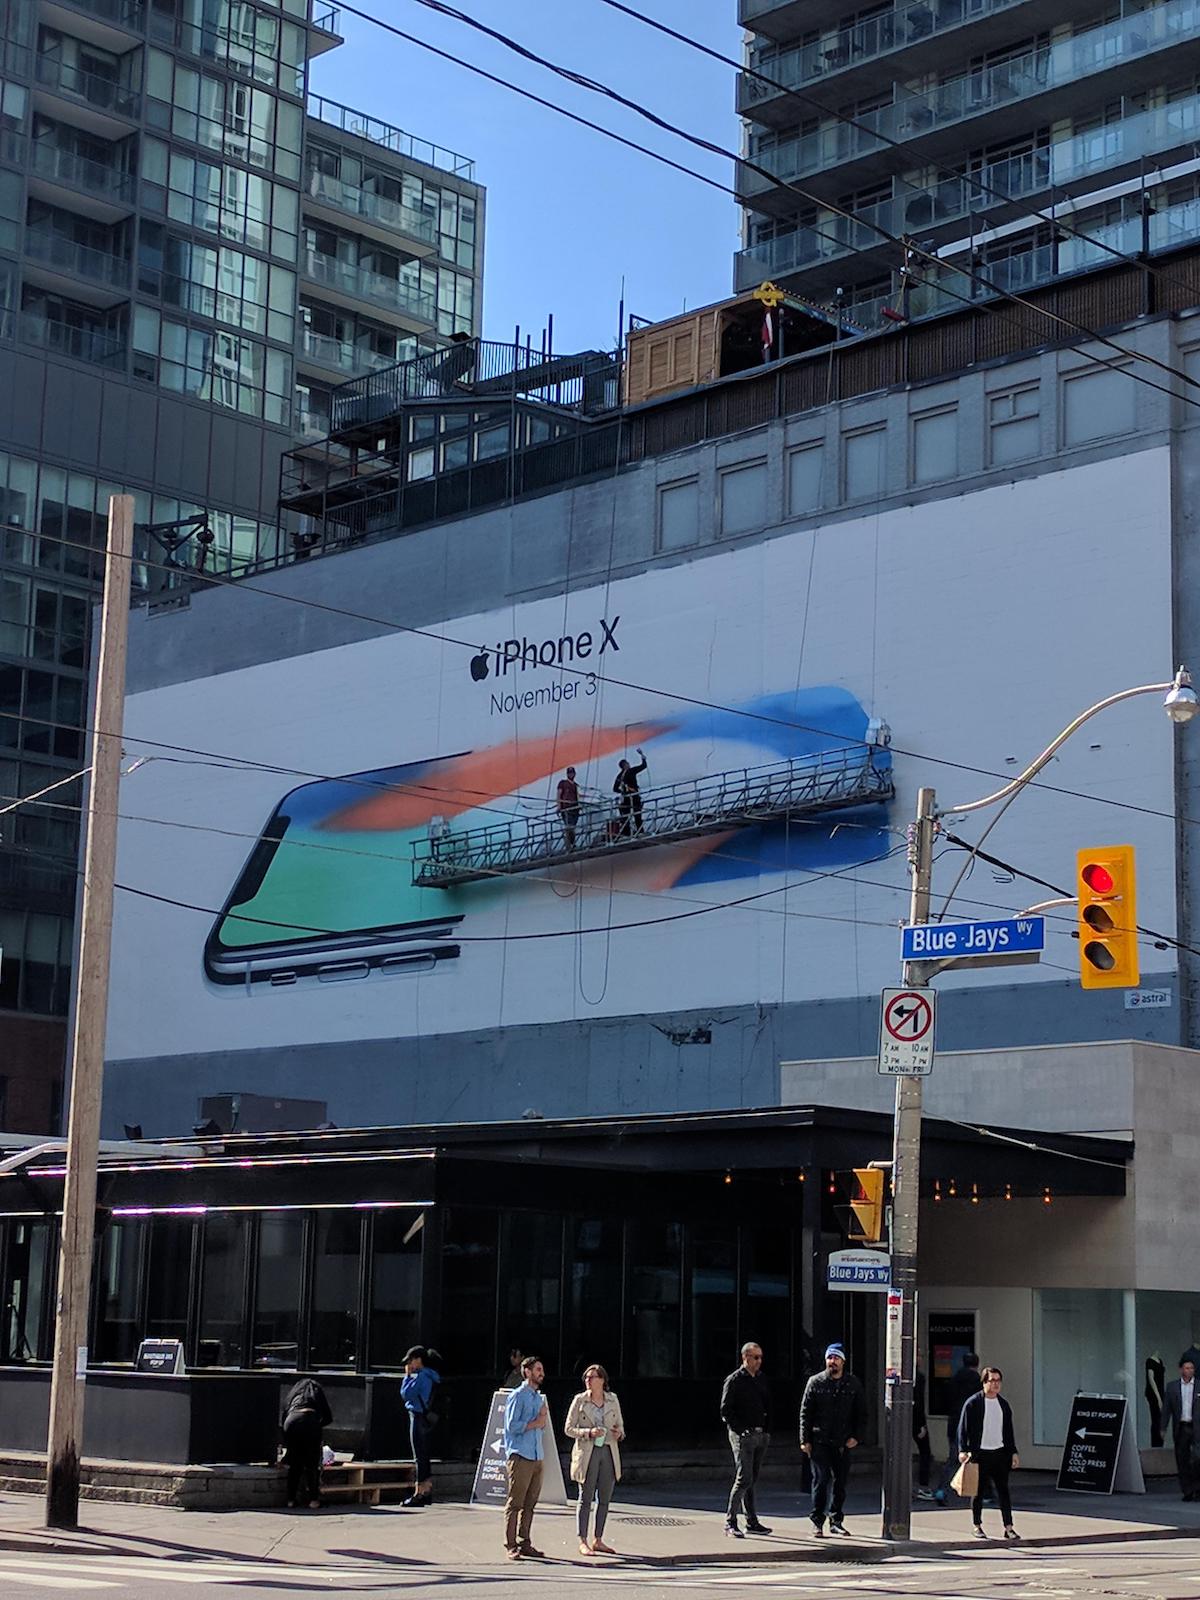 iPhone X Billboards Appear Various Cities Around the World